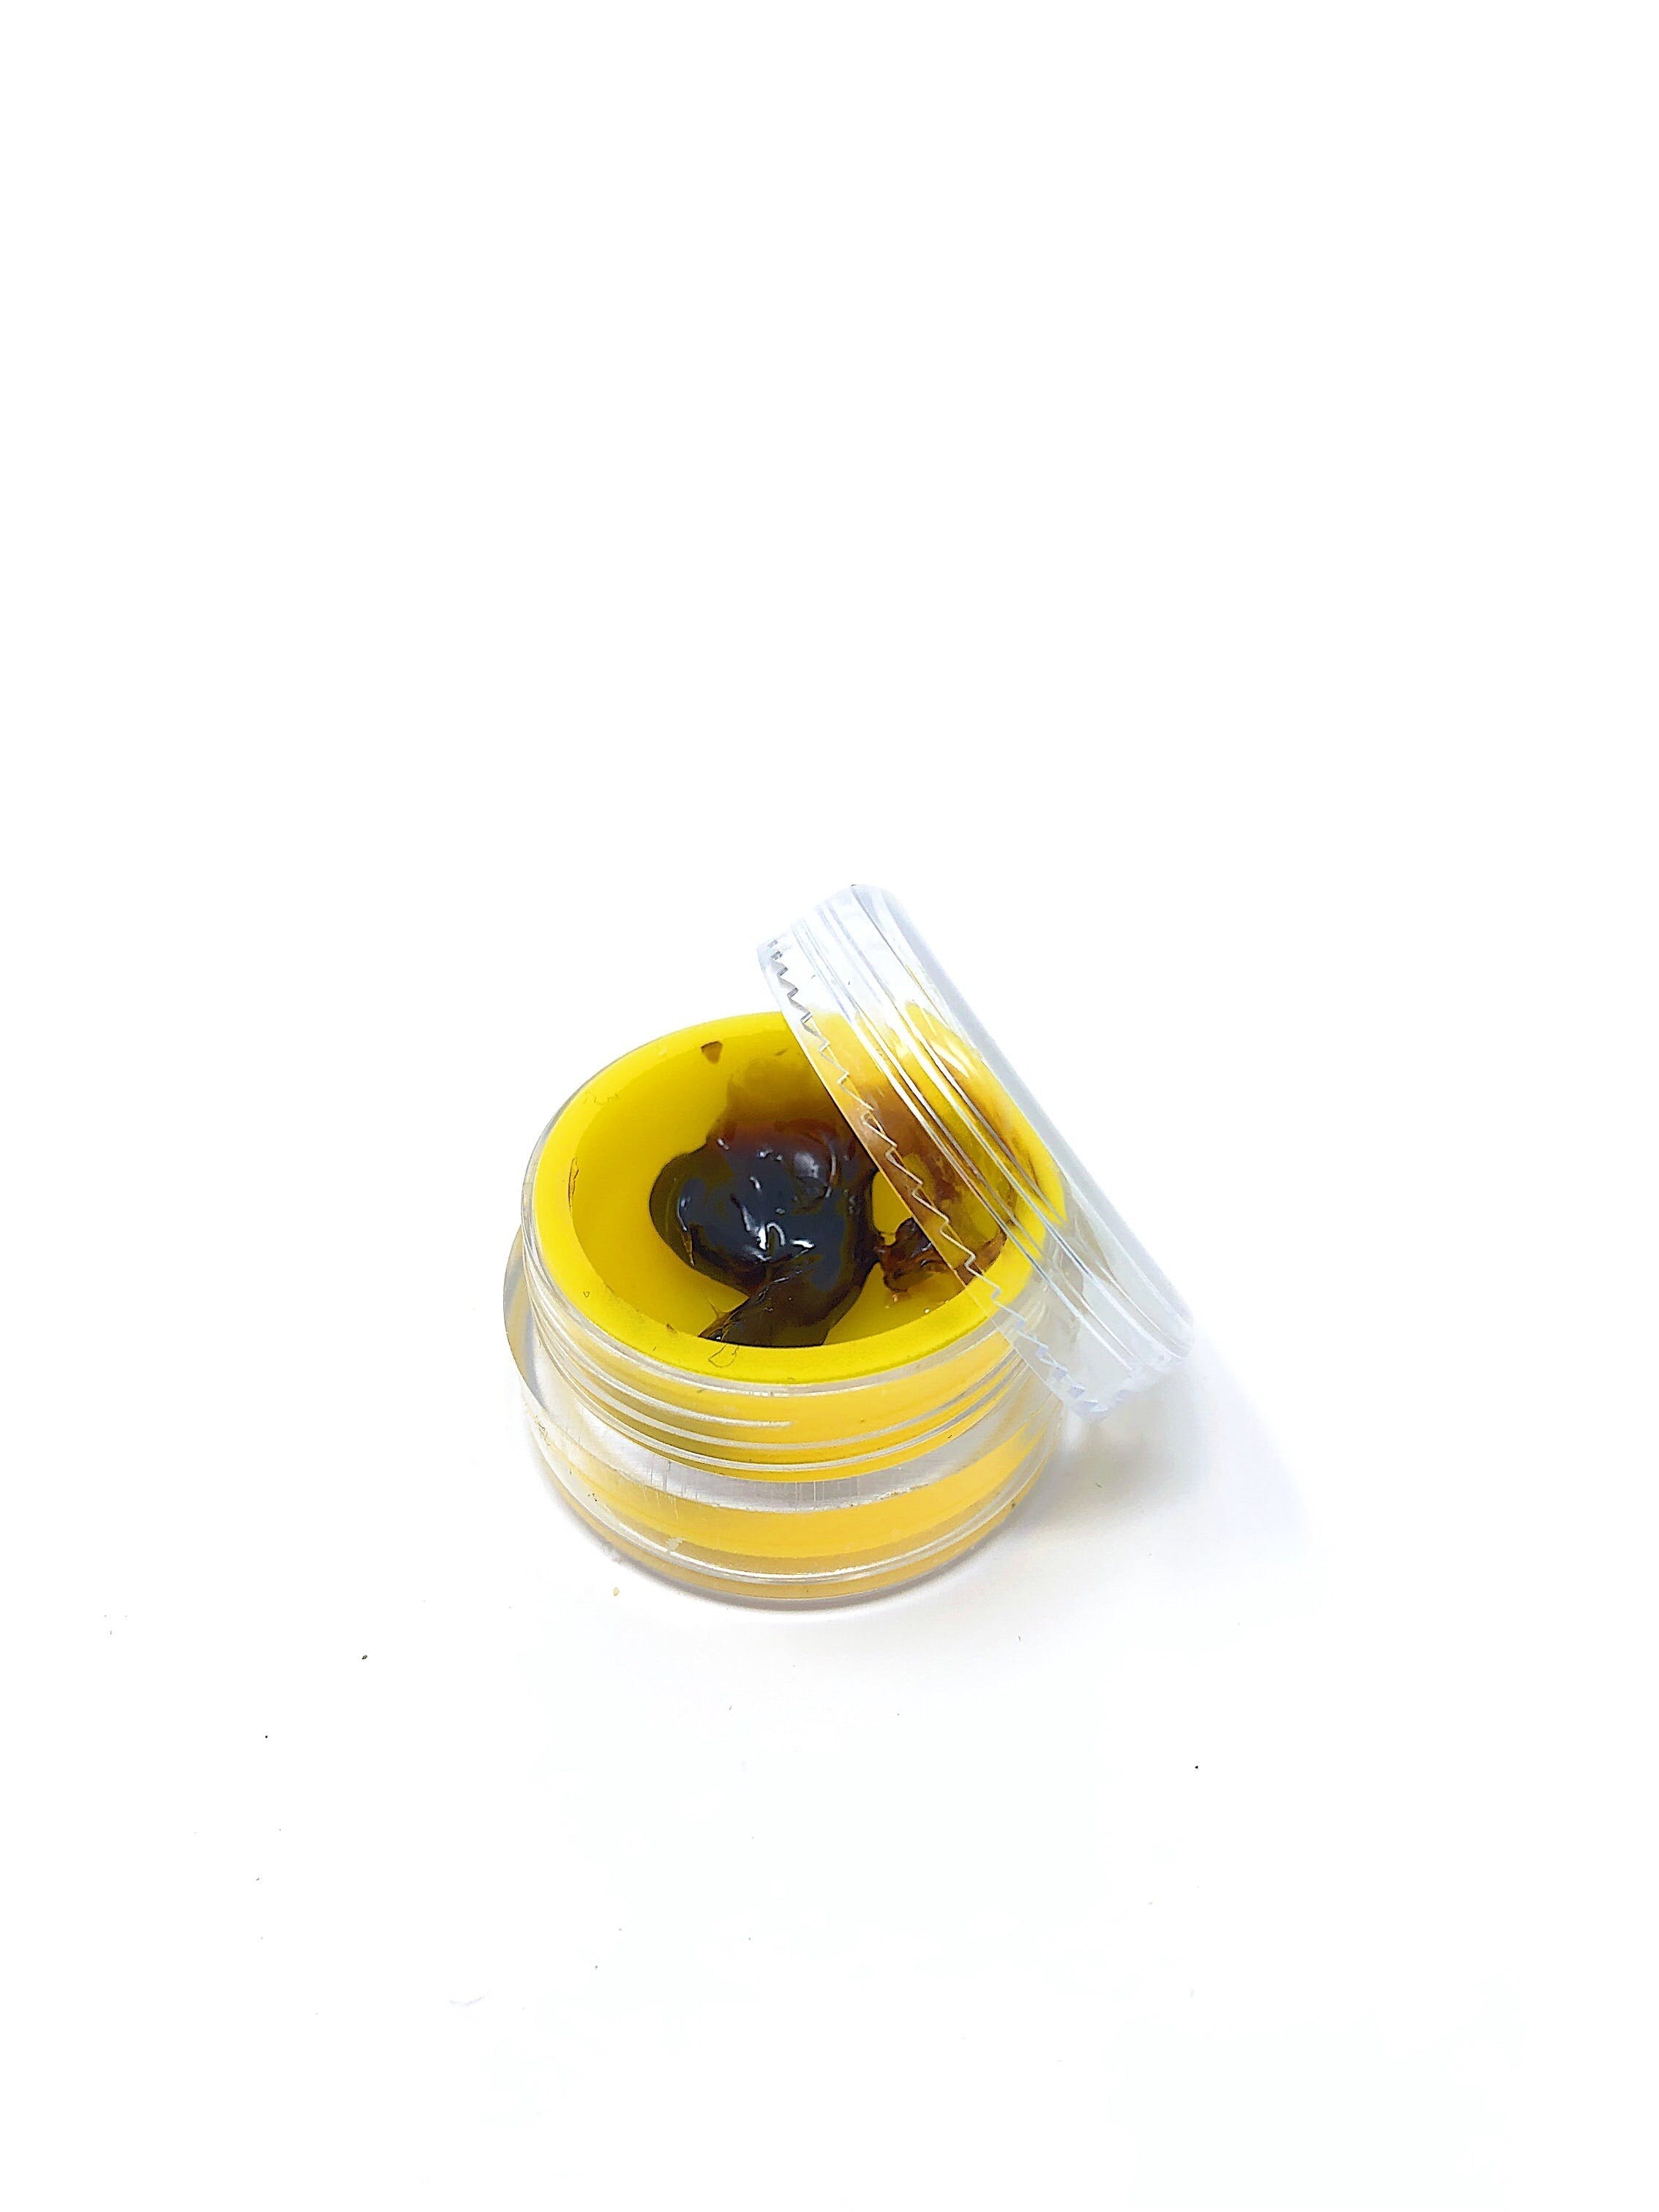 concentrate-solvent-free-rosin